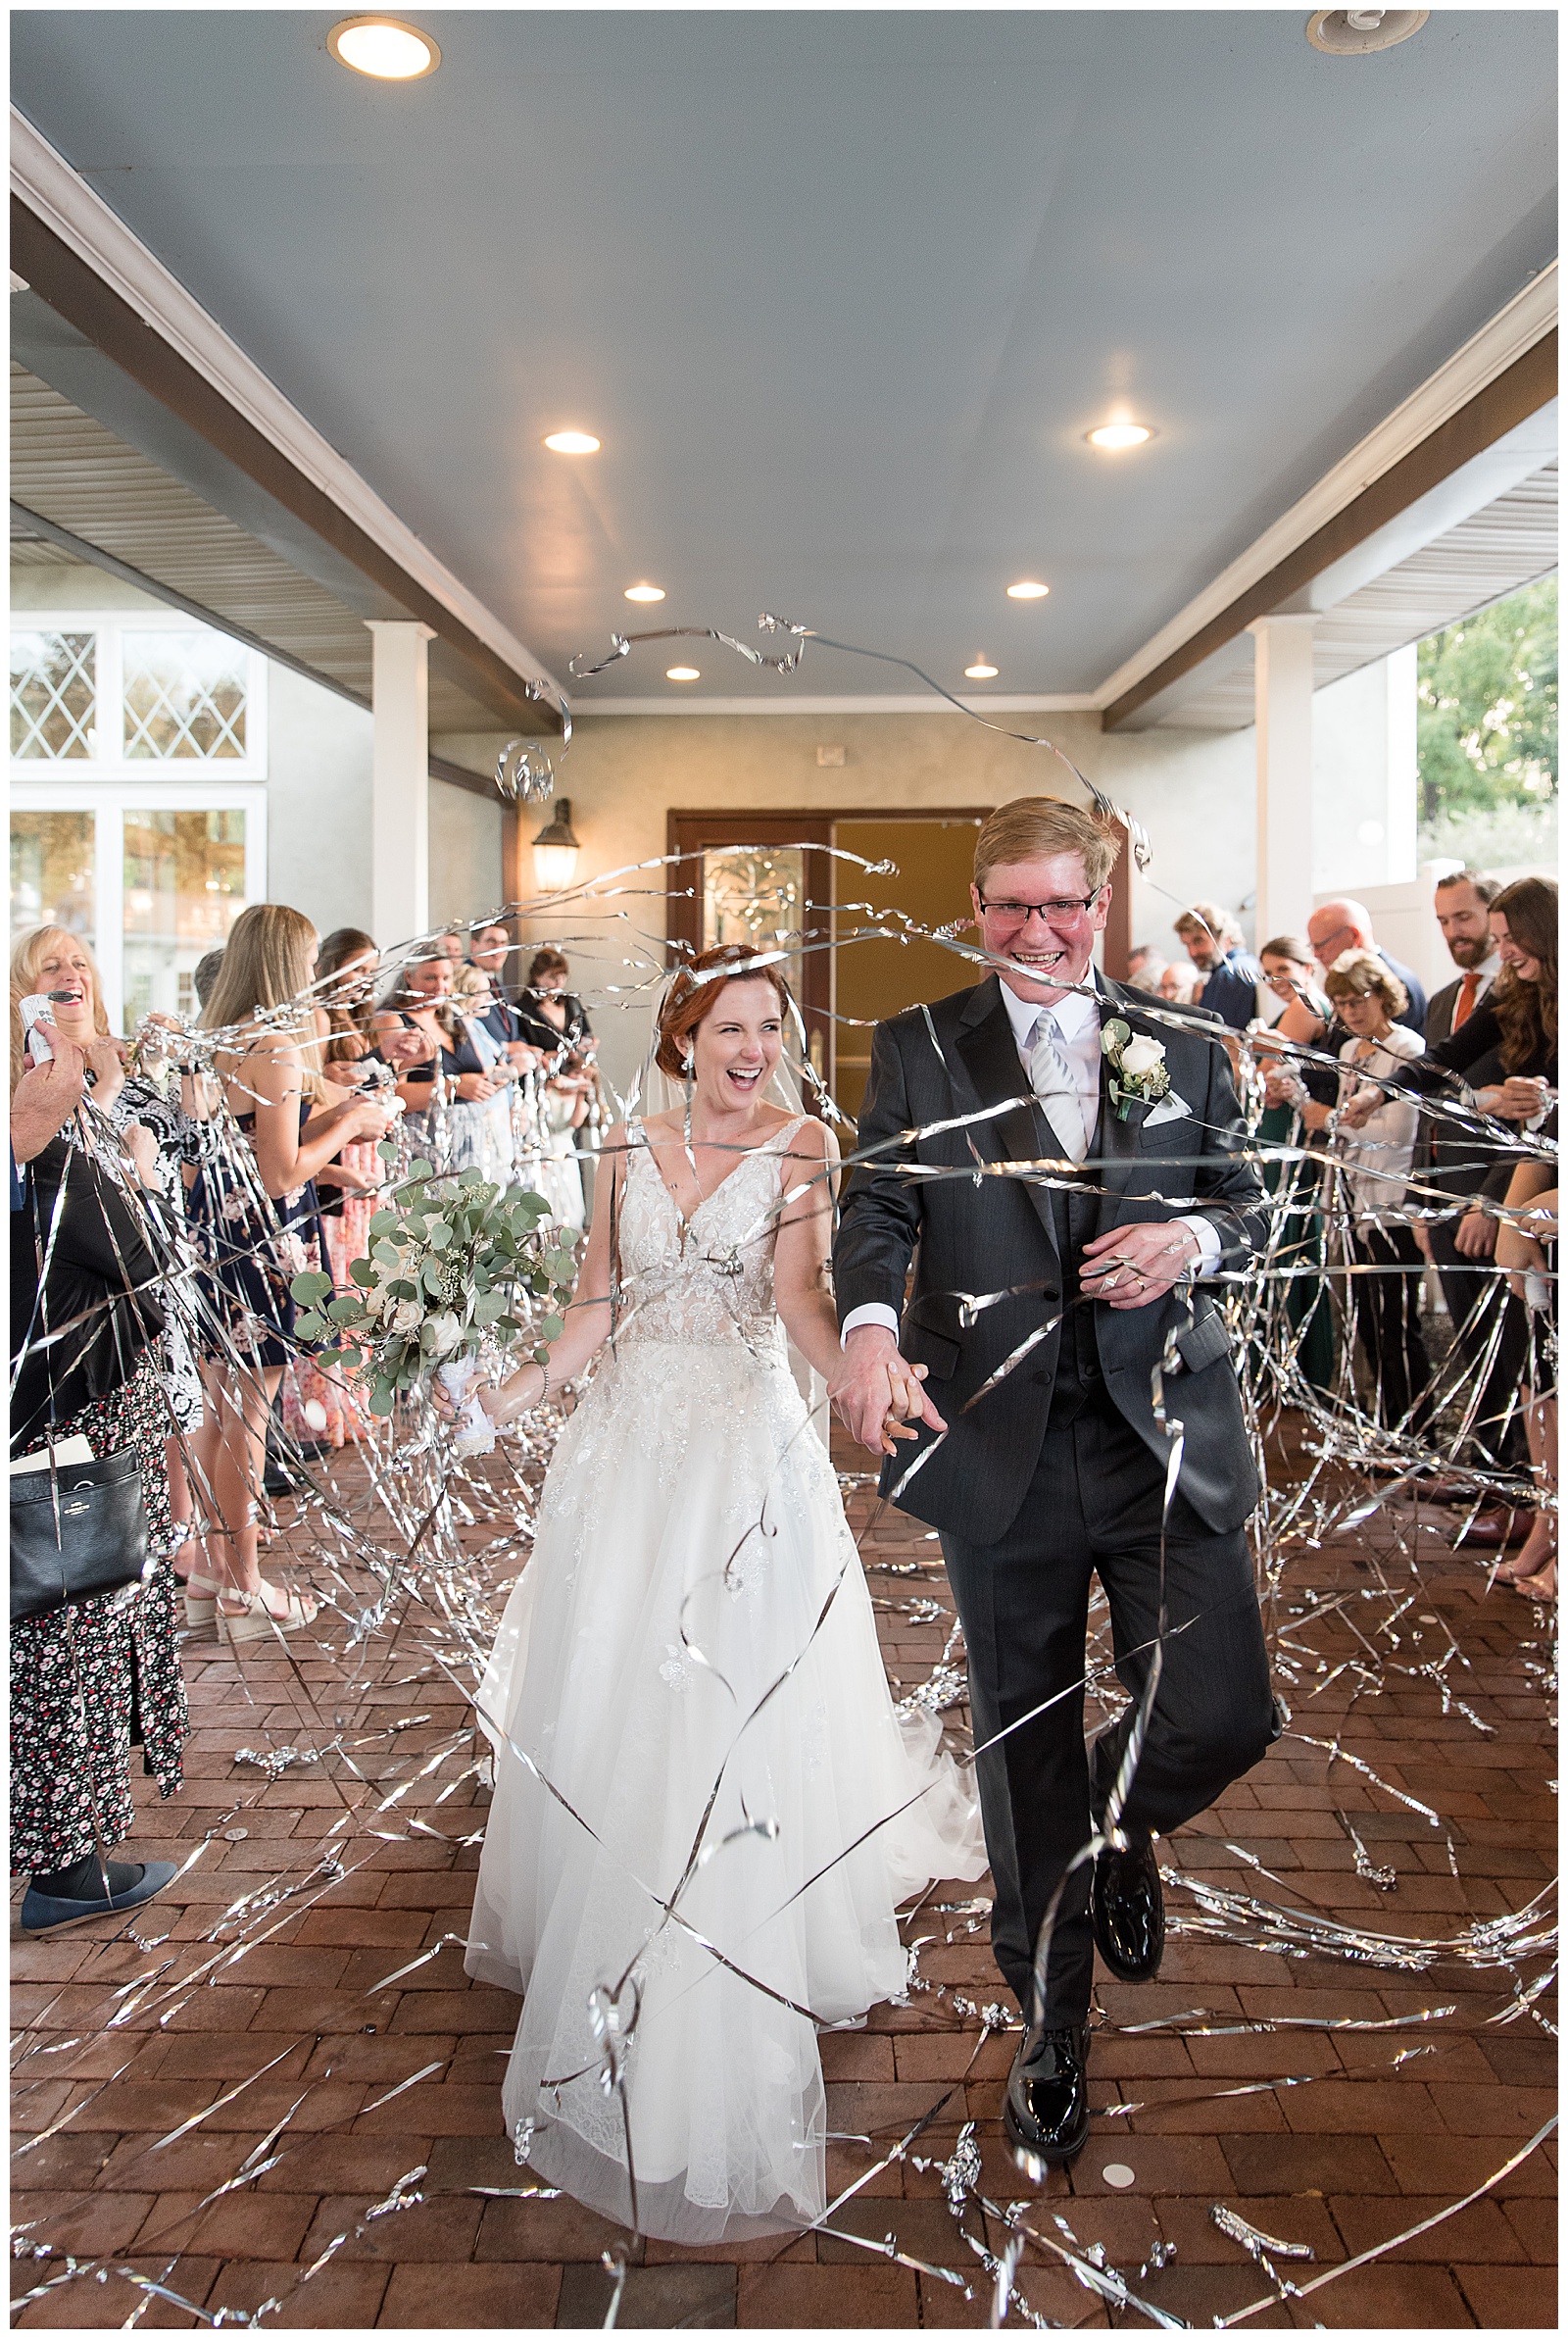 bride and groom walking through sea of confetti as they exit ceremony surrounded by their guests on summer day